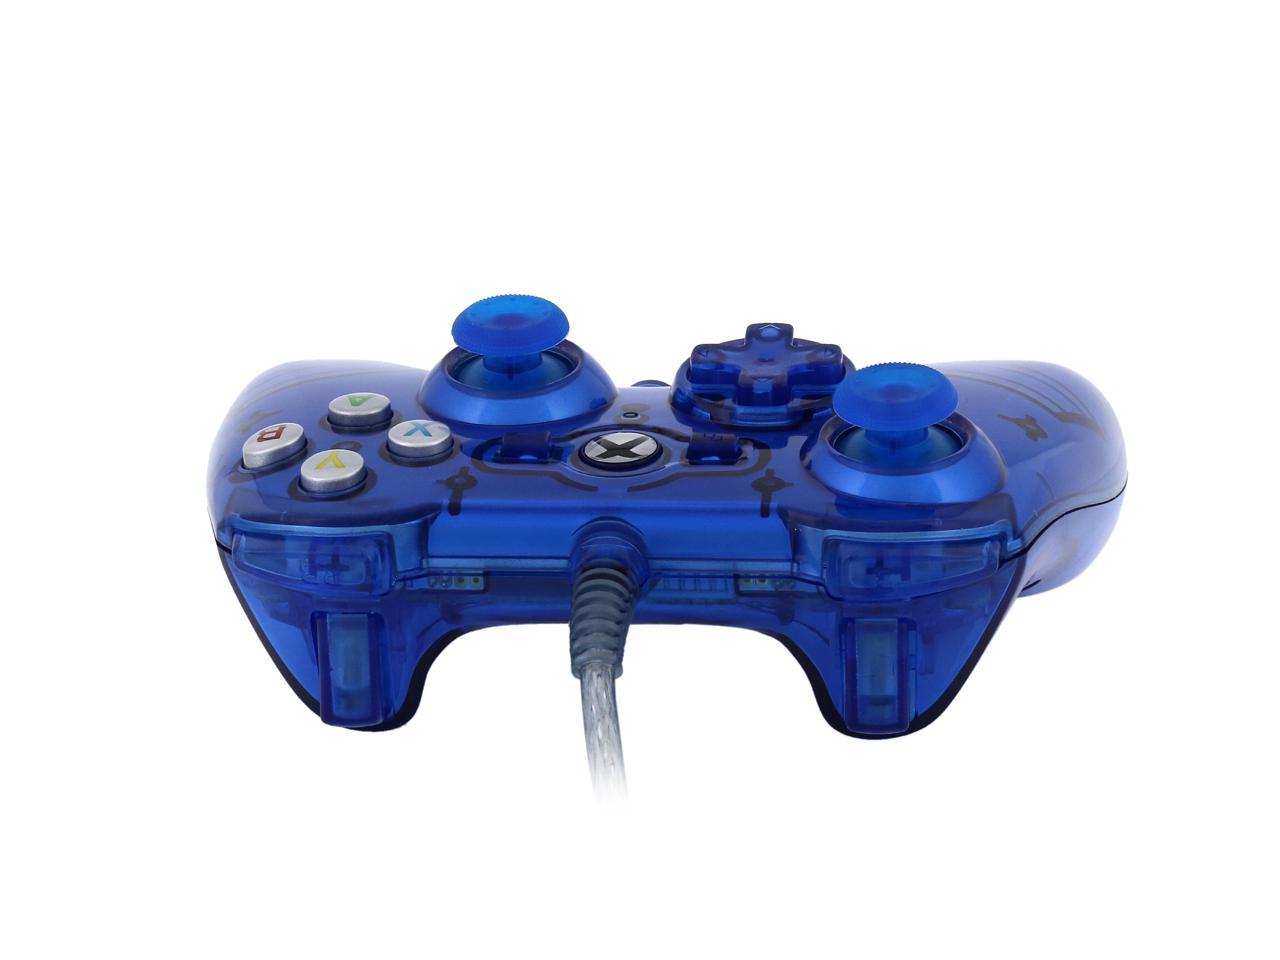 driver for xbox one liquid metal controller